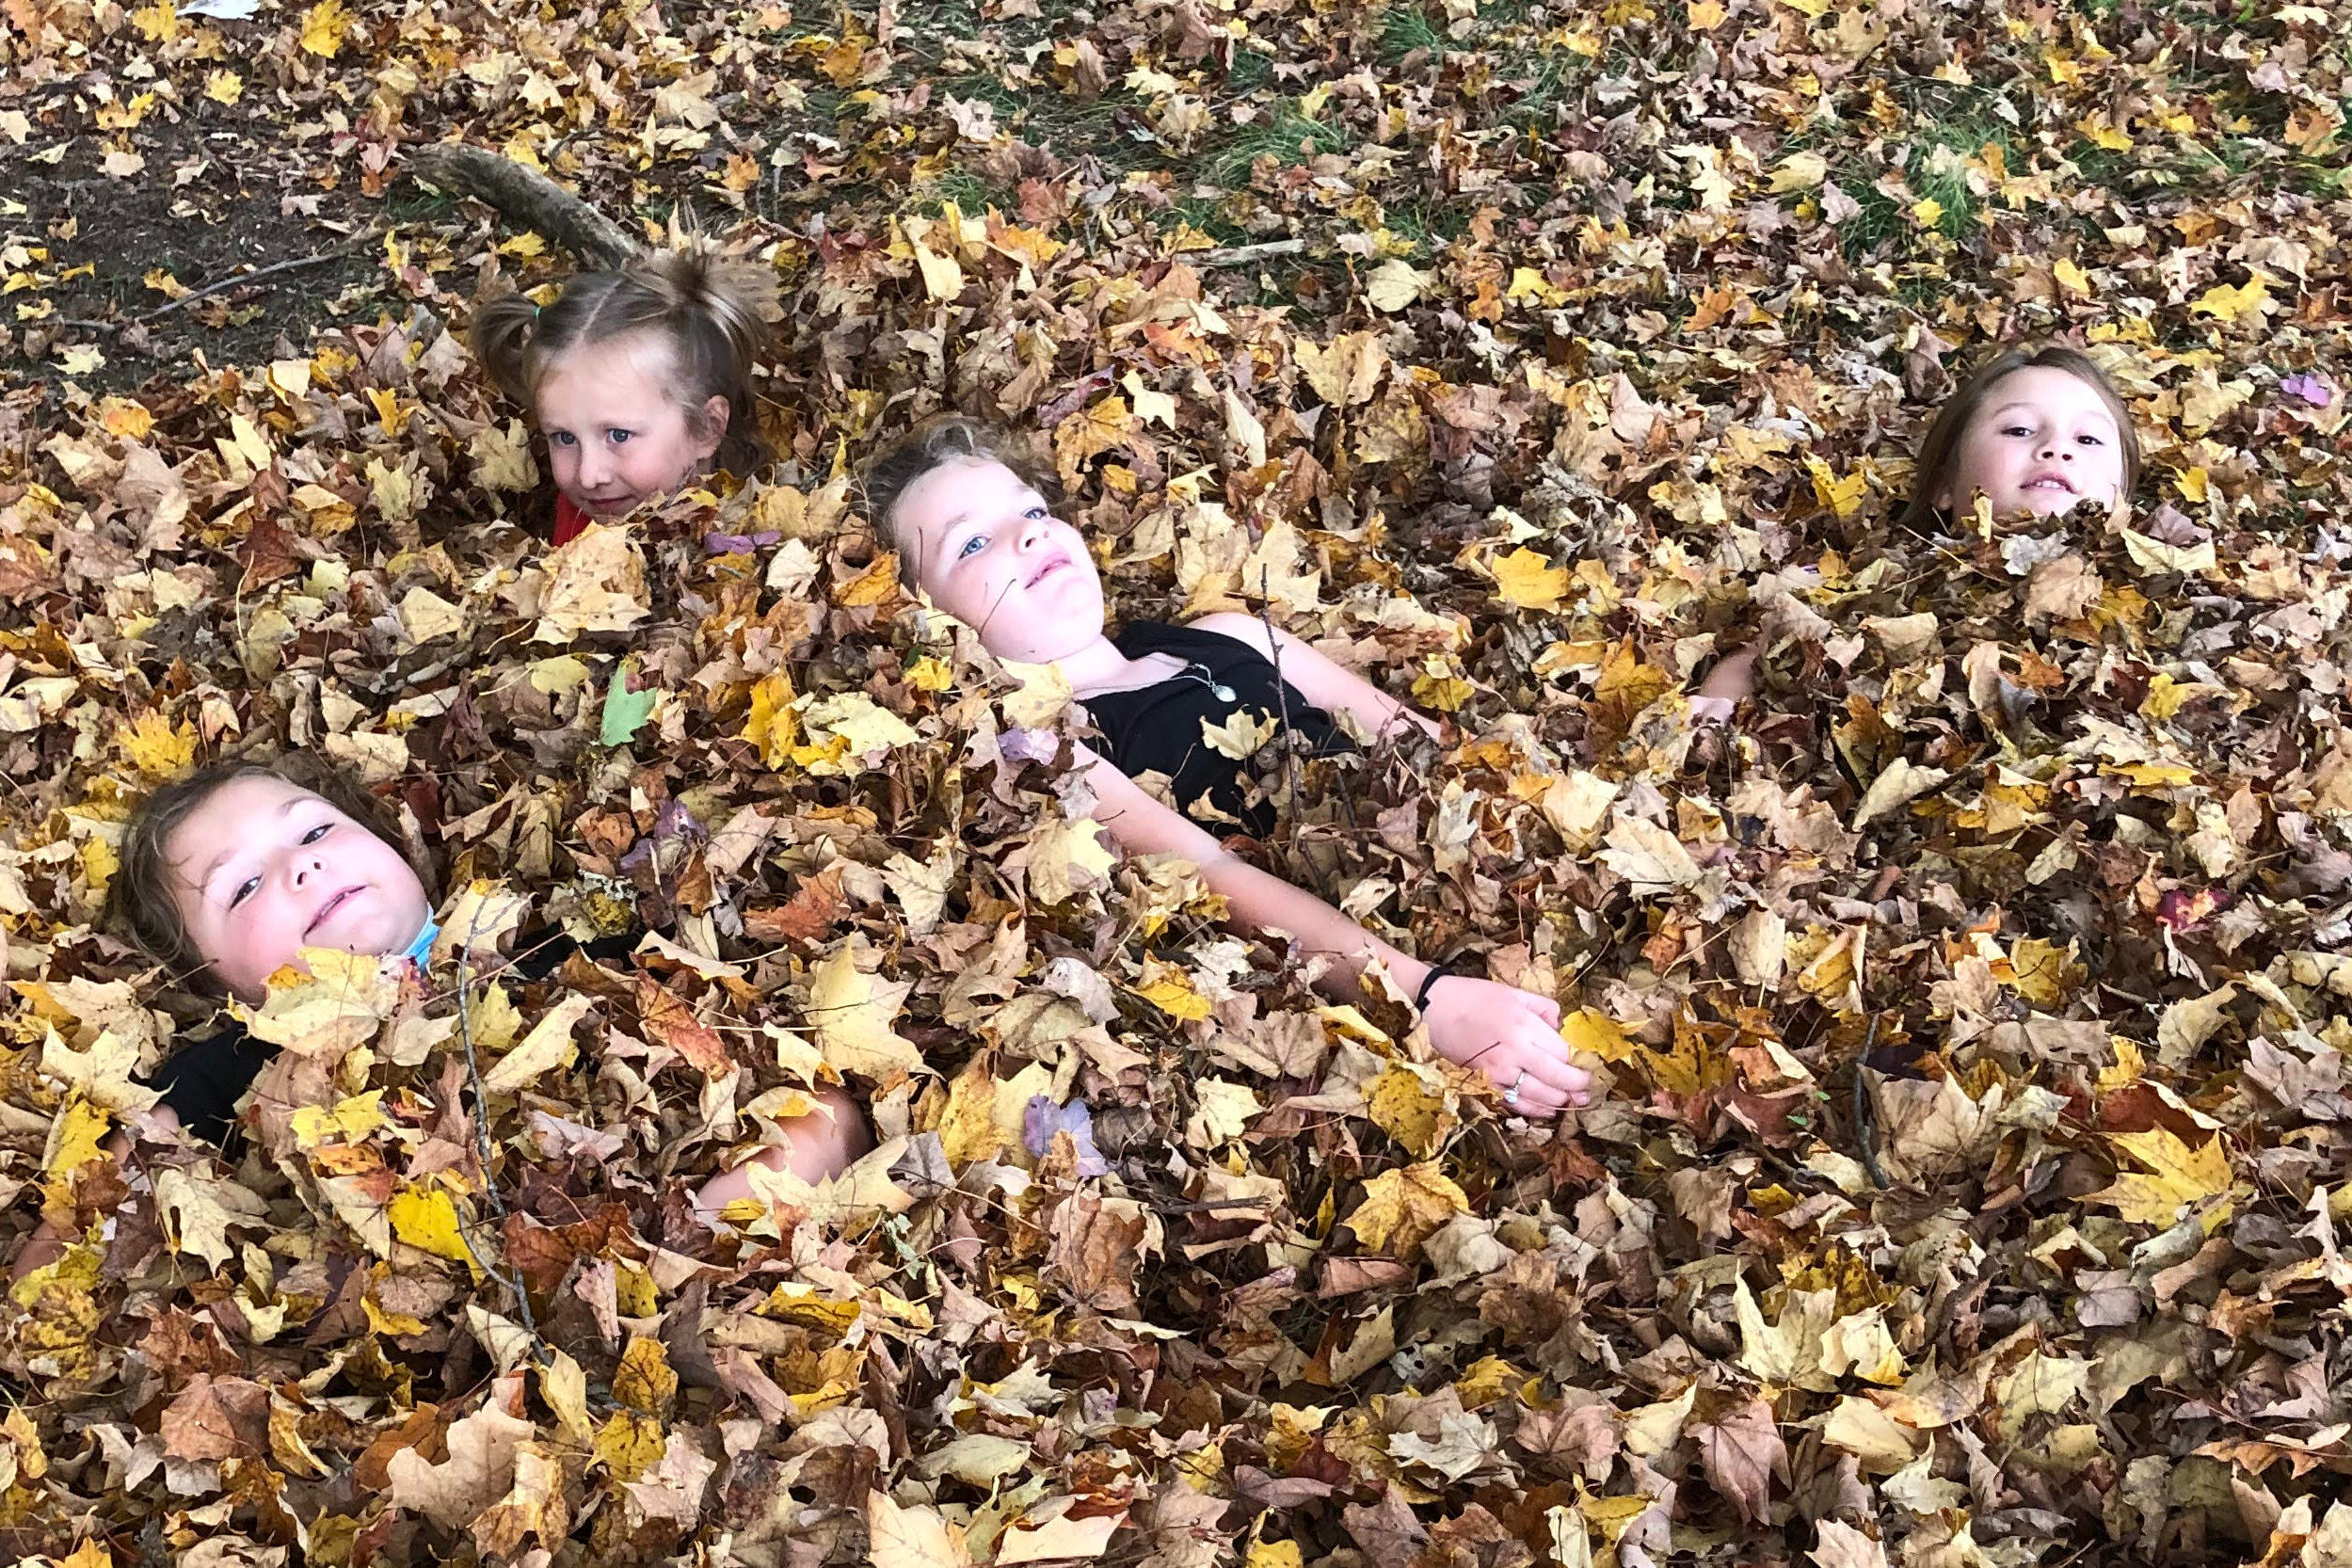 Children lost in fall leaves.